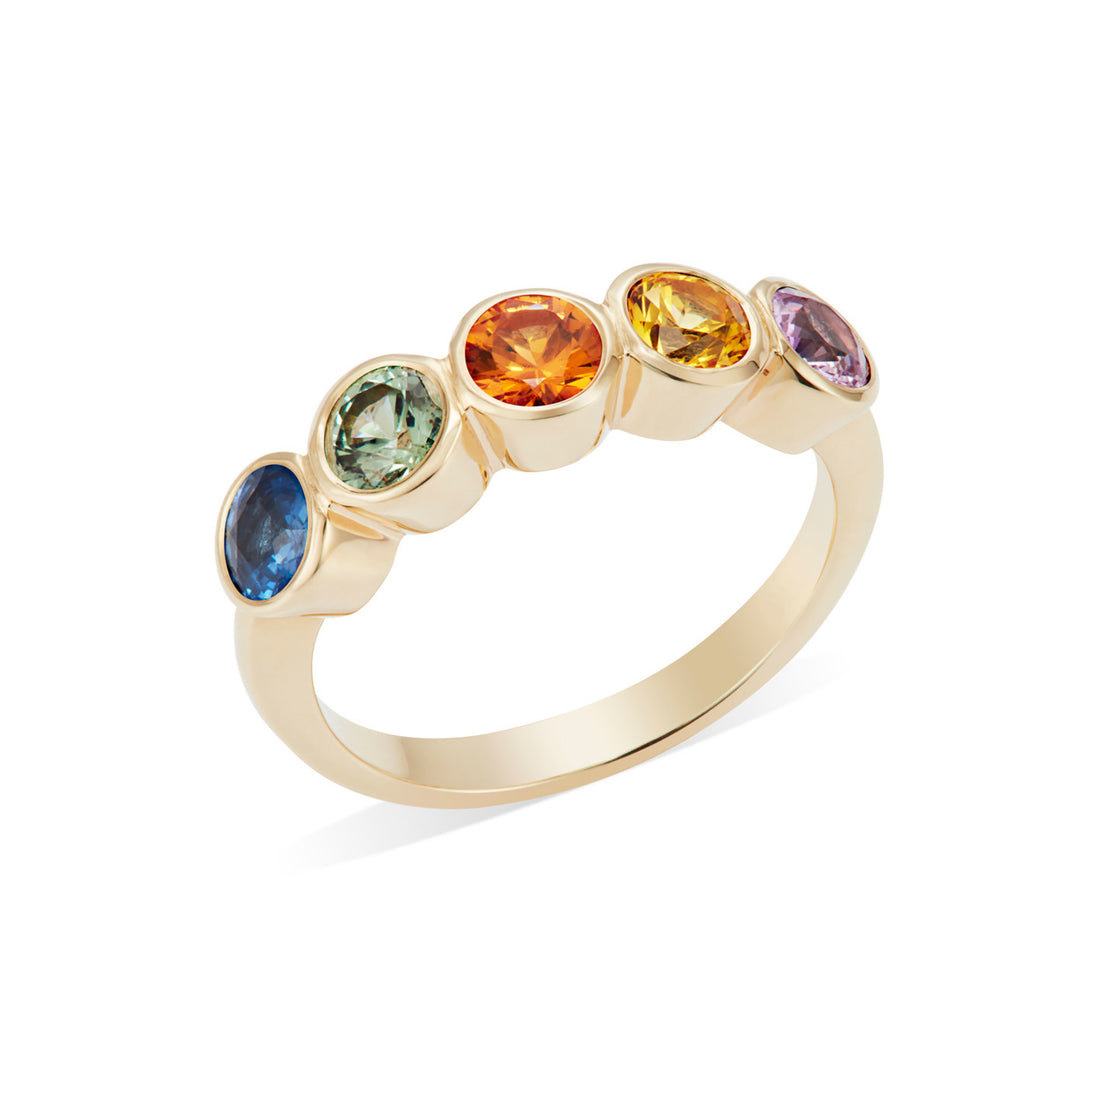  Five Sapphire Rainbow Ring by Lily Kamper | The Cut London